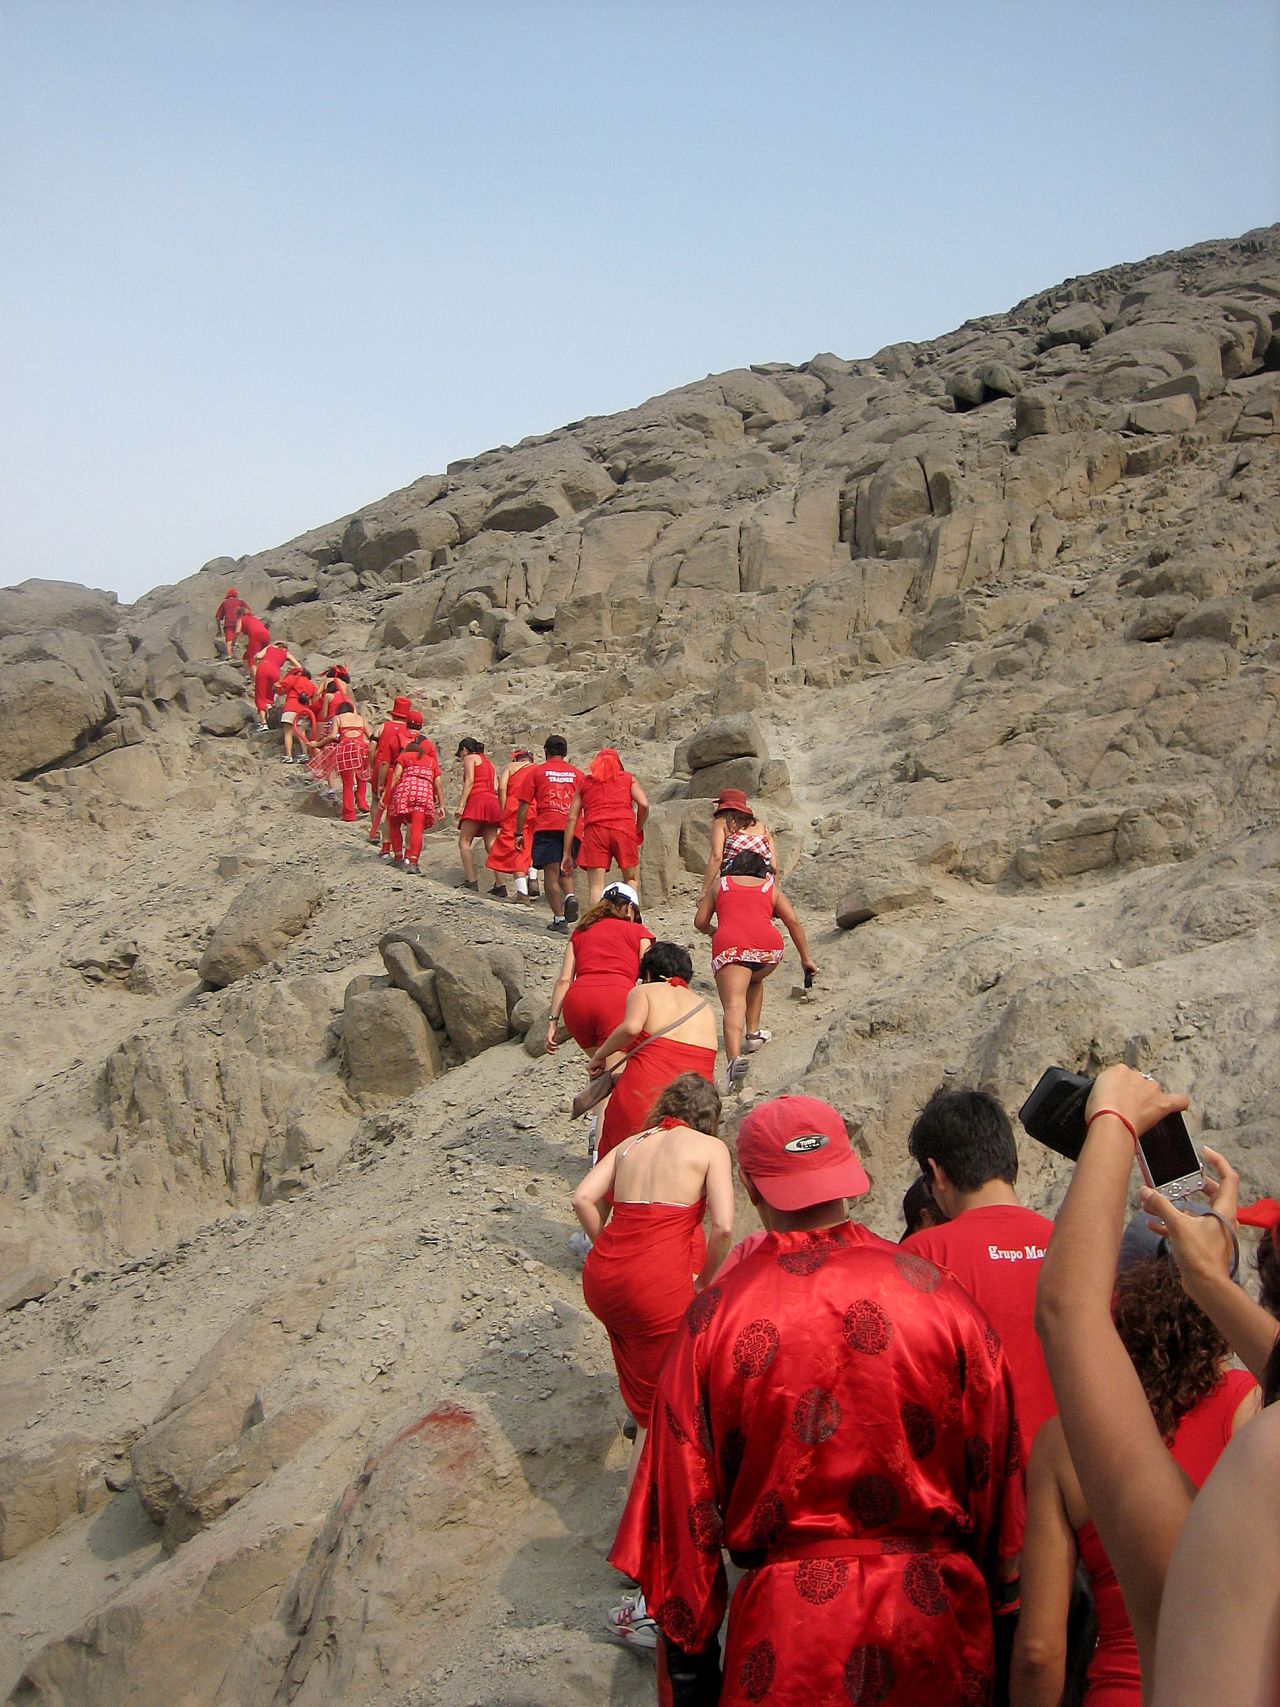 This traditional Red Dress Run covers rocky terrain in Peru.